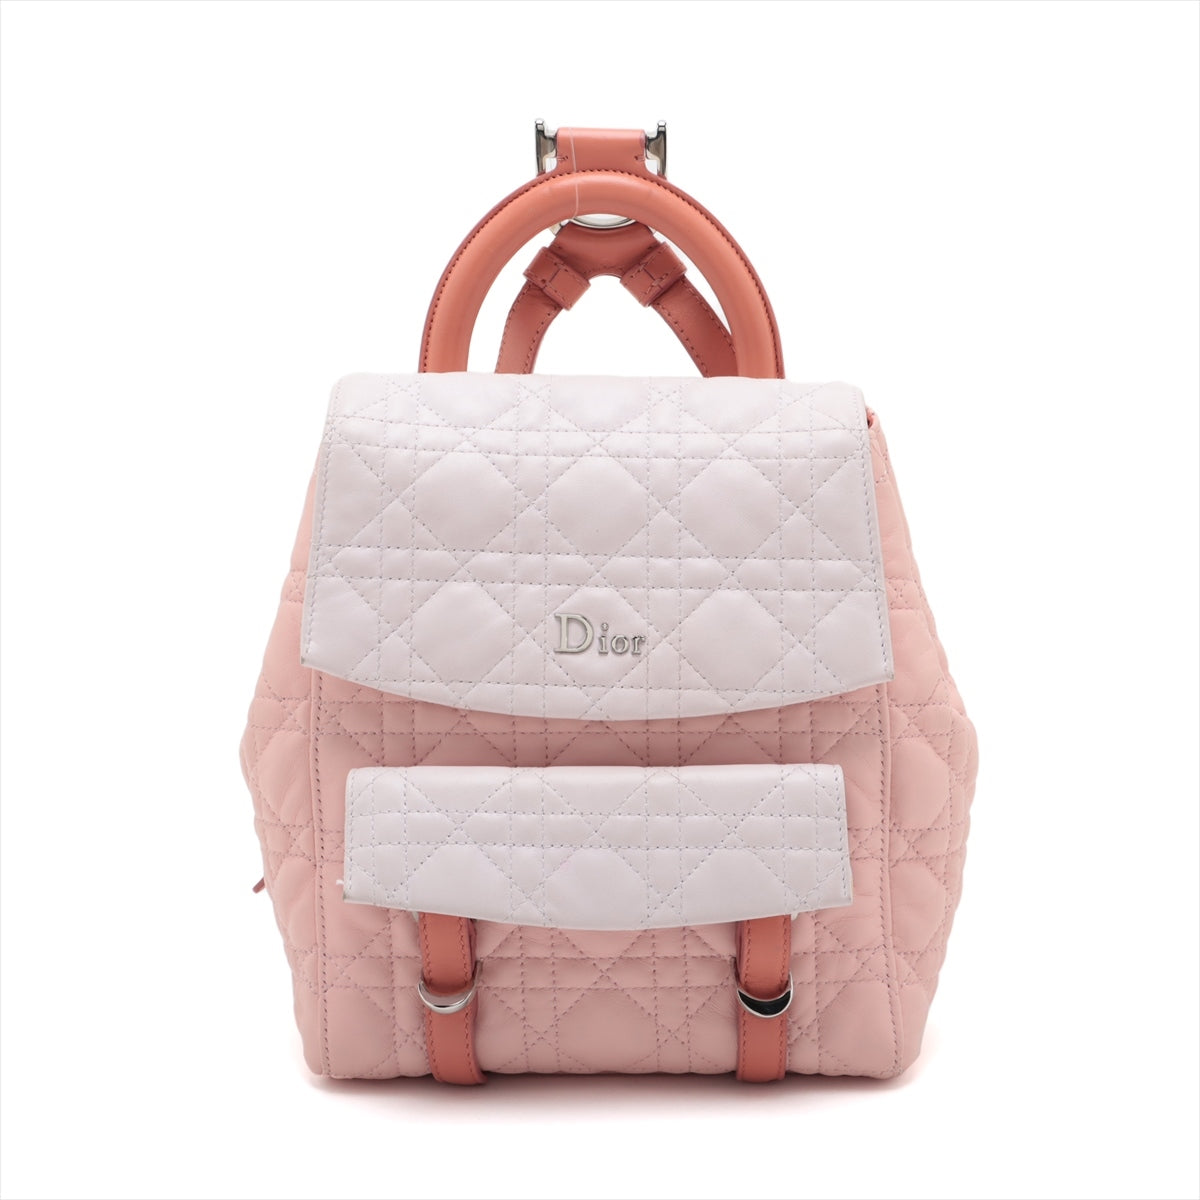 Christian Dior Cannage Leather Backpack Pink